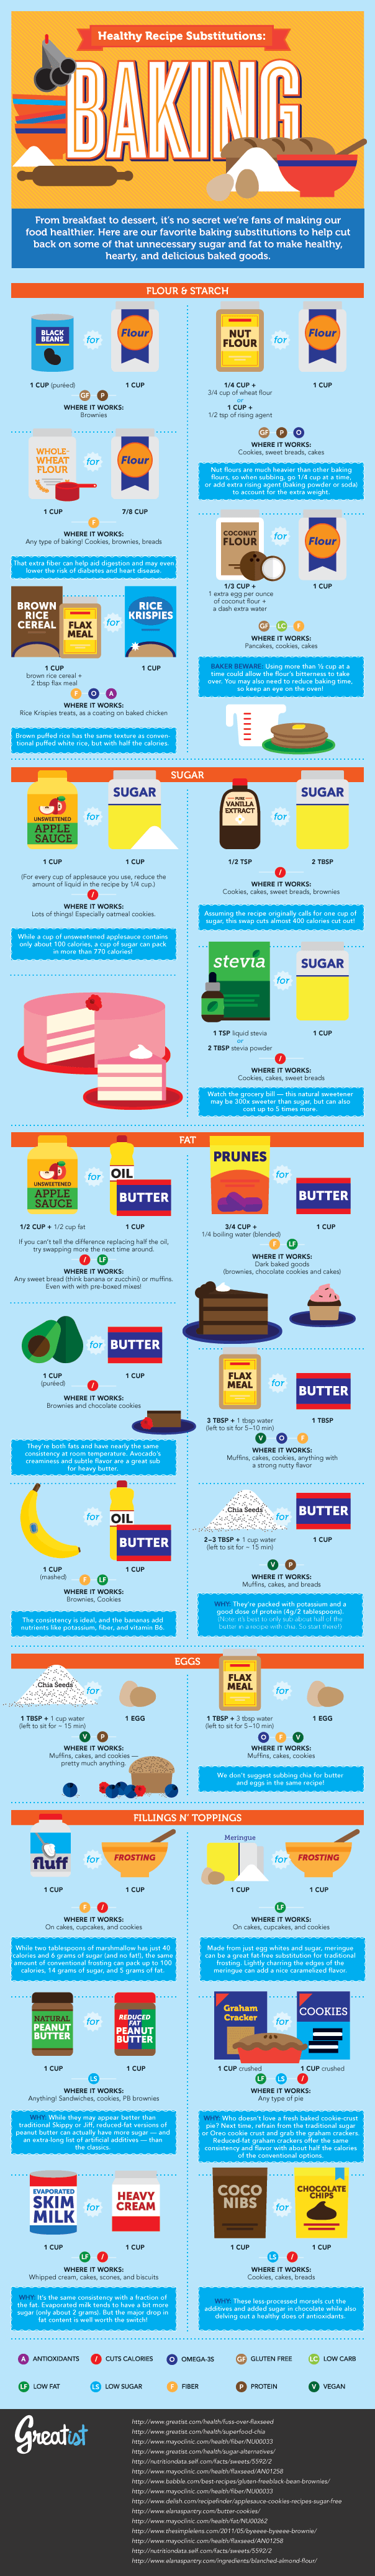 Healthy Baking Substitutions